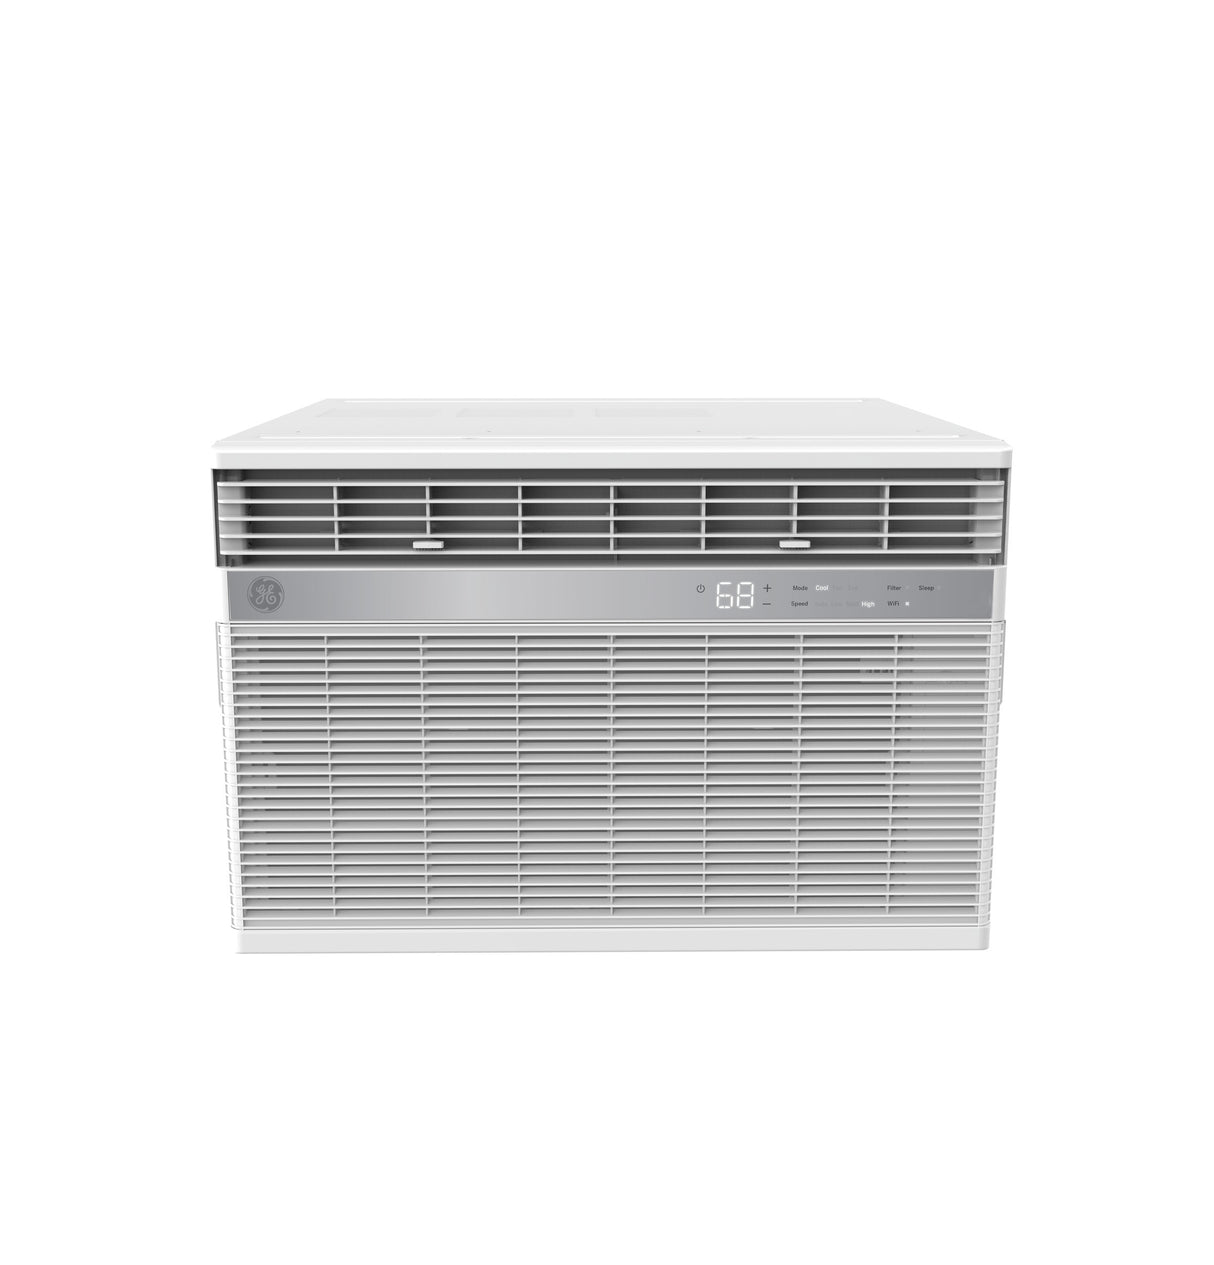 GE(R) 23,700 BTU Smart Electronic Window Air Conditioner for Extra-Large Rooms up to 1500 sq. ft. - (AHFK24BA)